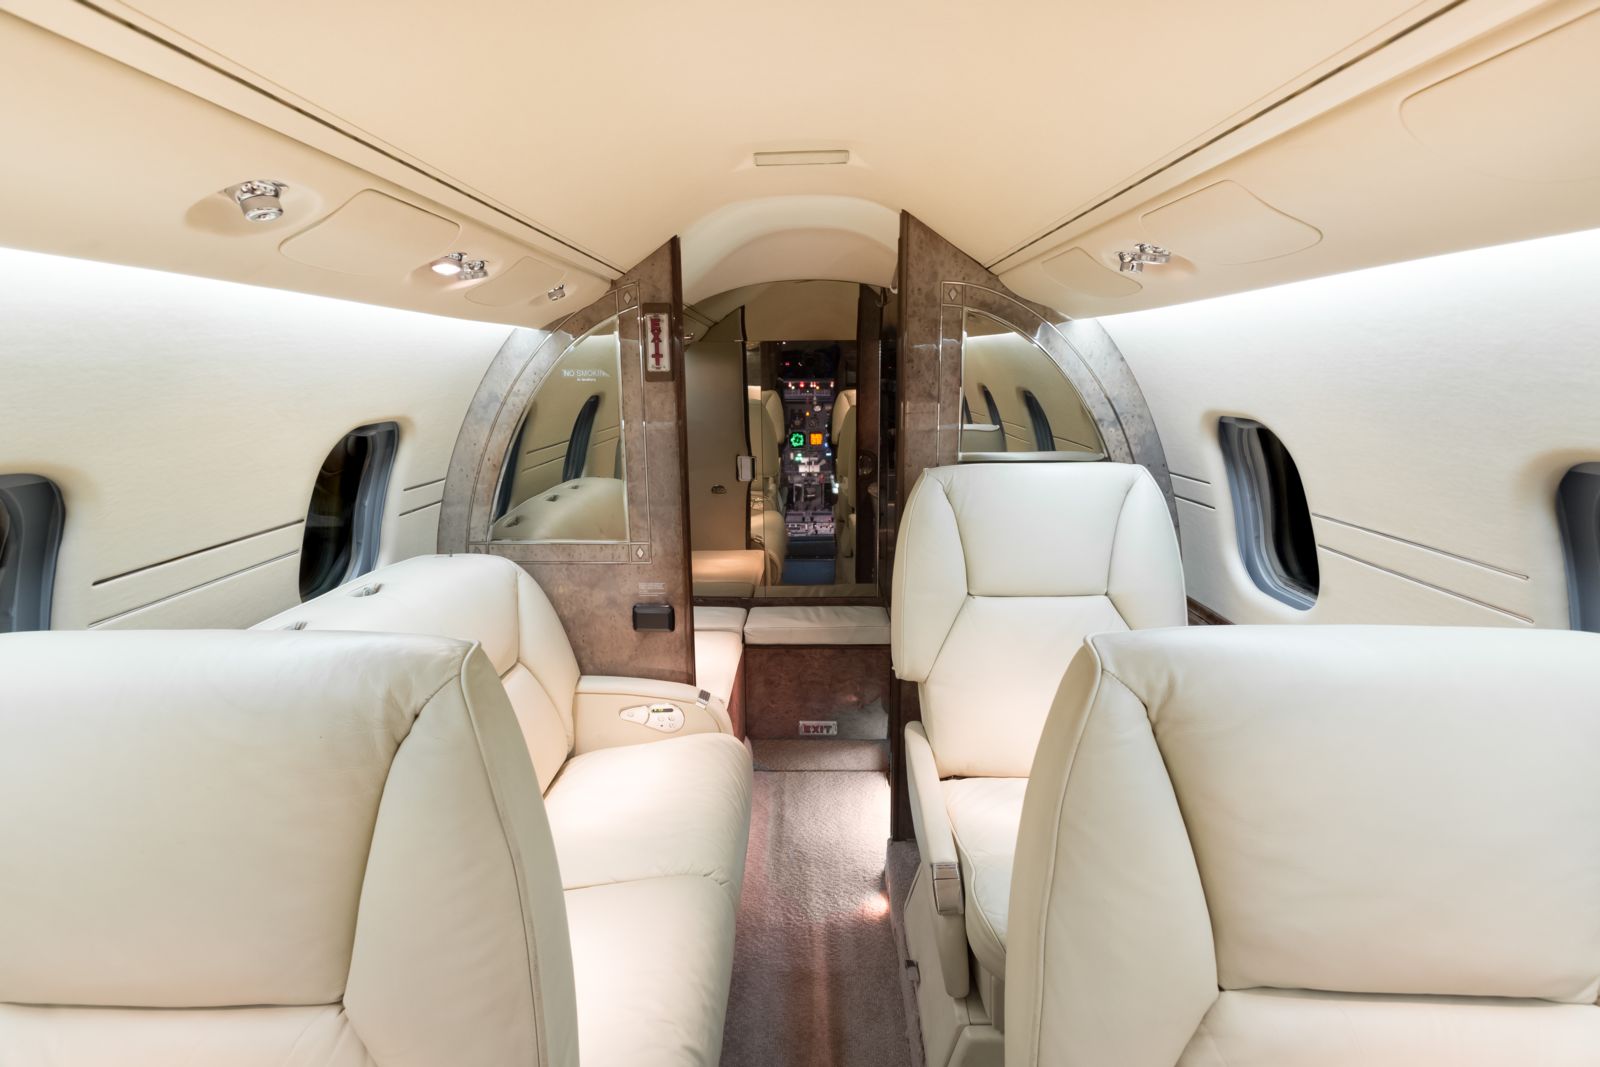 Bombardier Learjet 60  S/N 60-197 for sale | gallery image: /userfiles/images/Lear60_sn197/aft%20aft.jpg